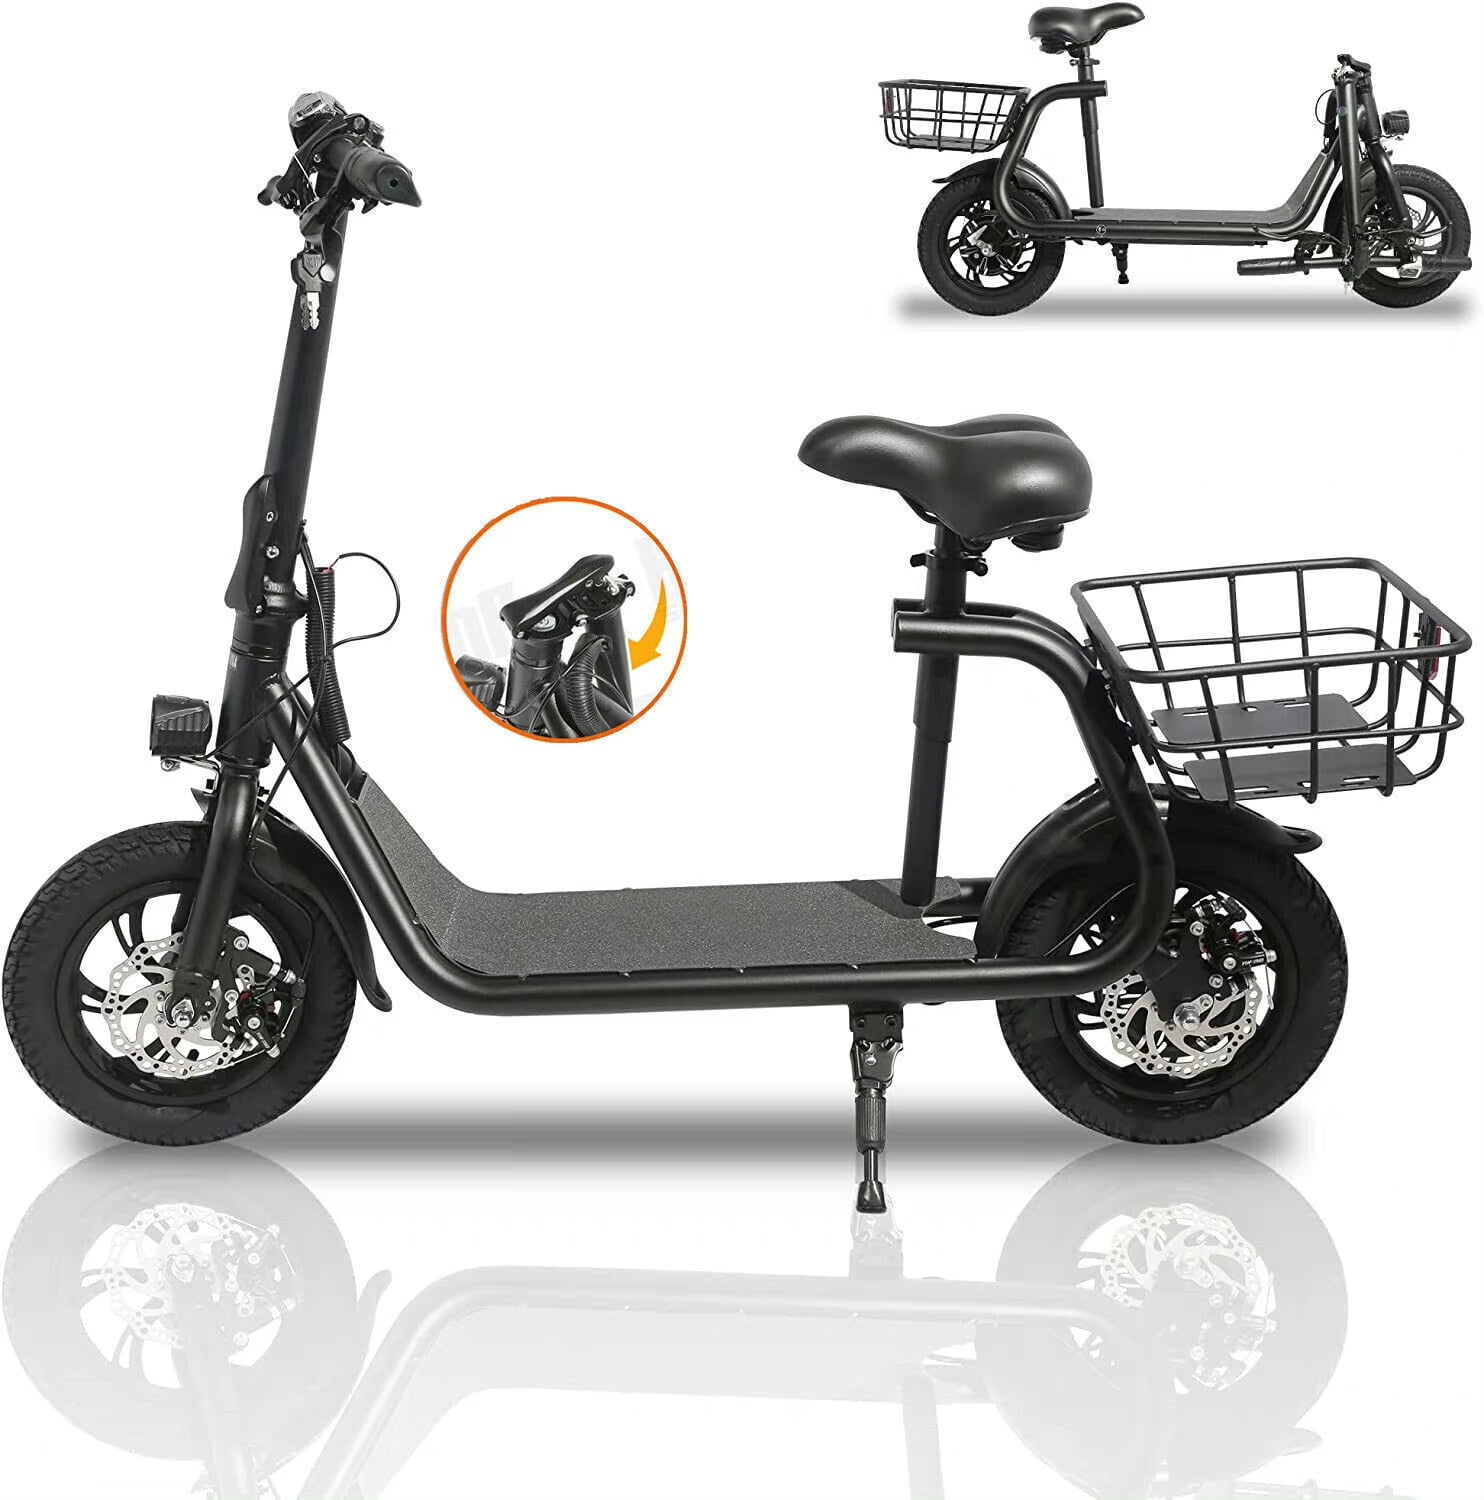 Lohoms 450W 36V Foldable Electric Scooters Bike, Adult Electric Moped  Commuter Ebike Biycle Waterproof E-Scooter With Seat Basket 12 in Off-Road